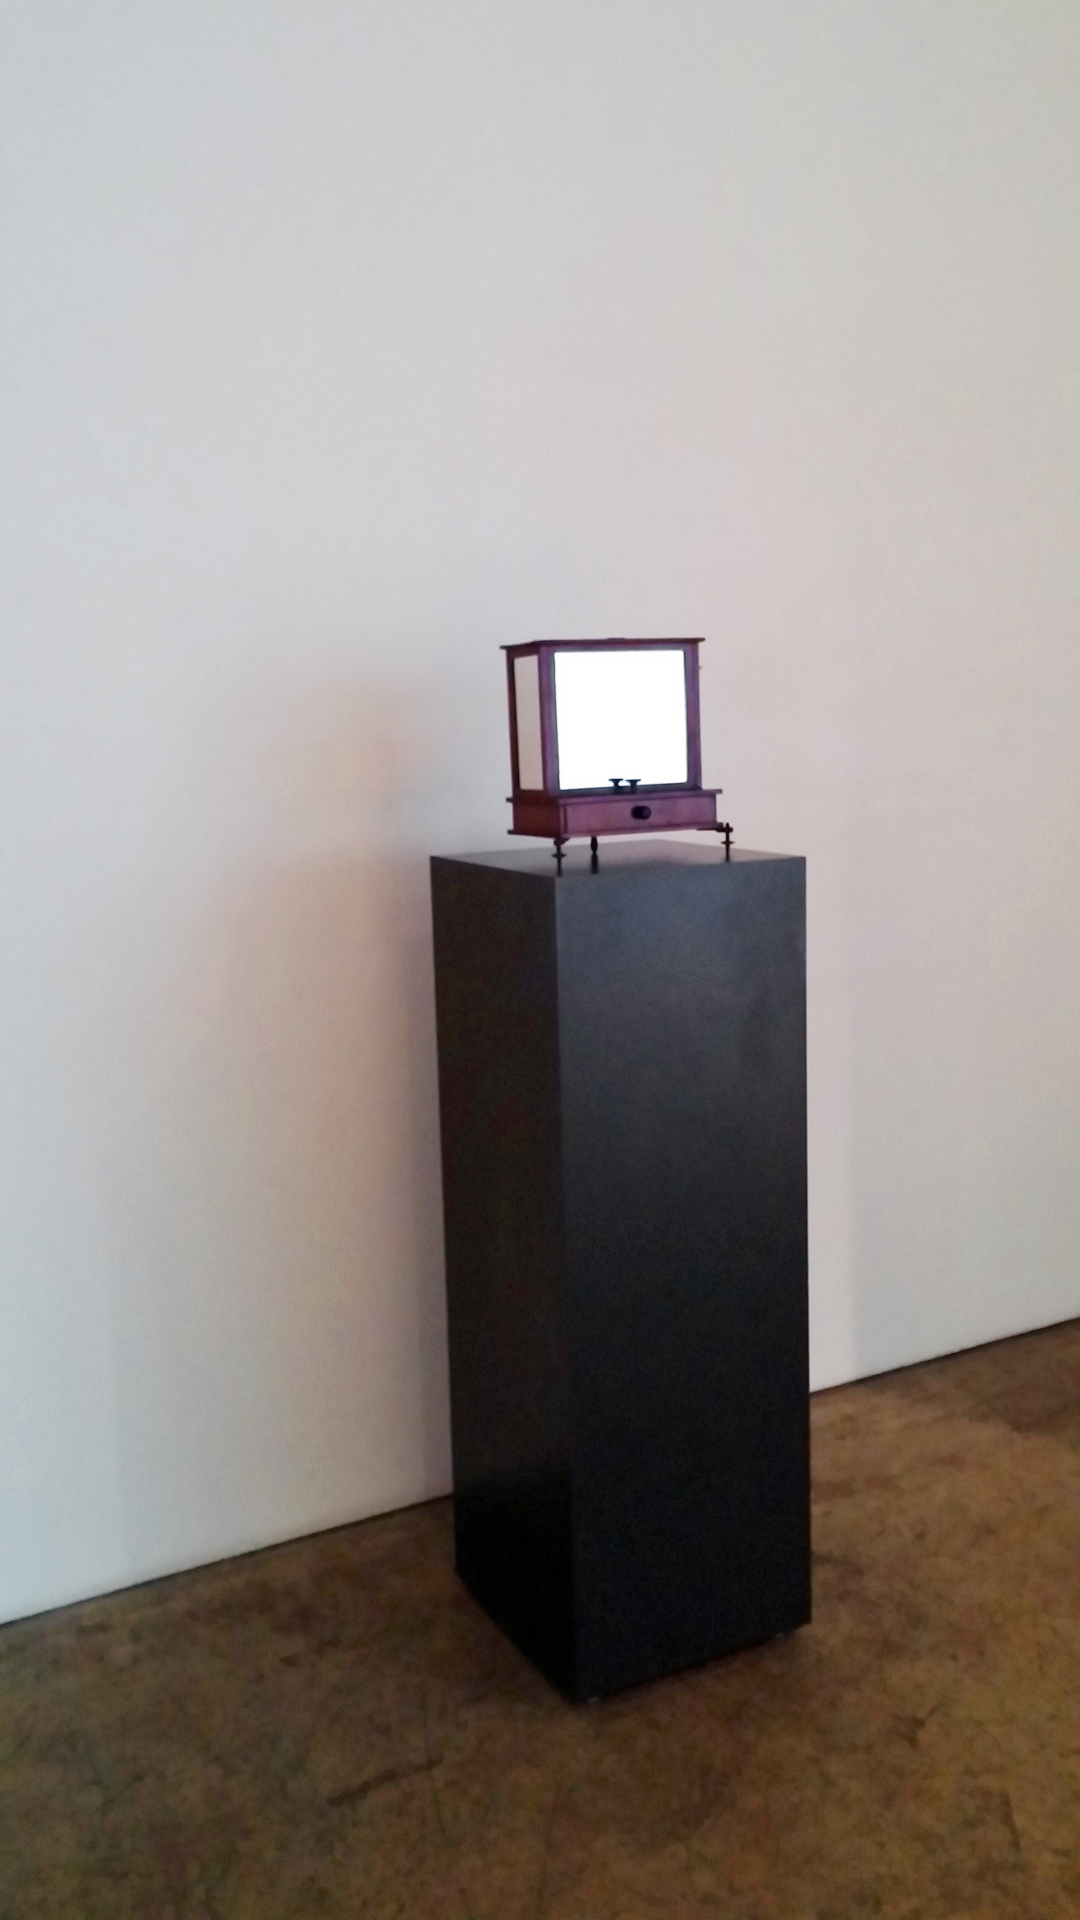 Installation View 1 Repetition 2014